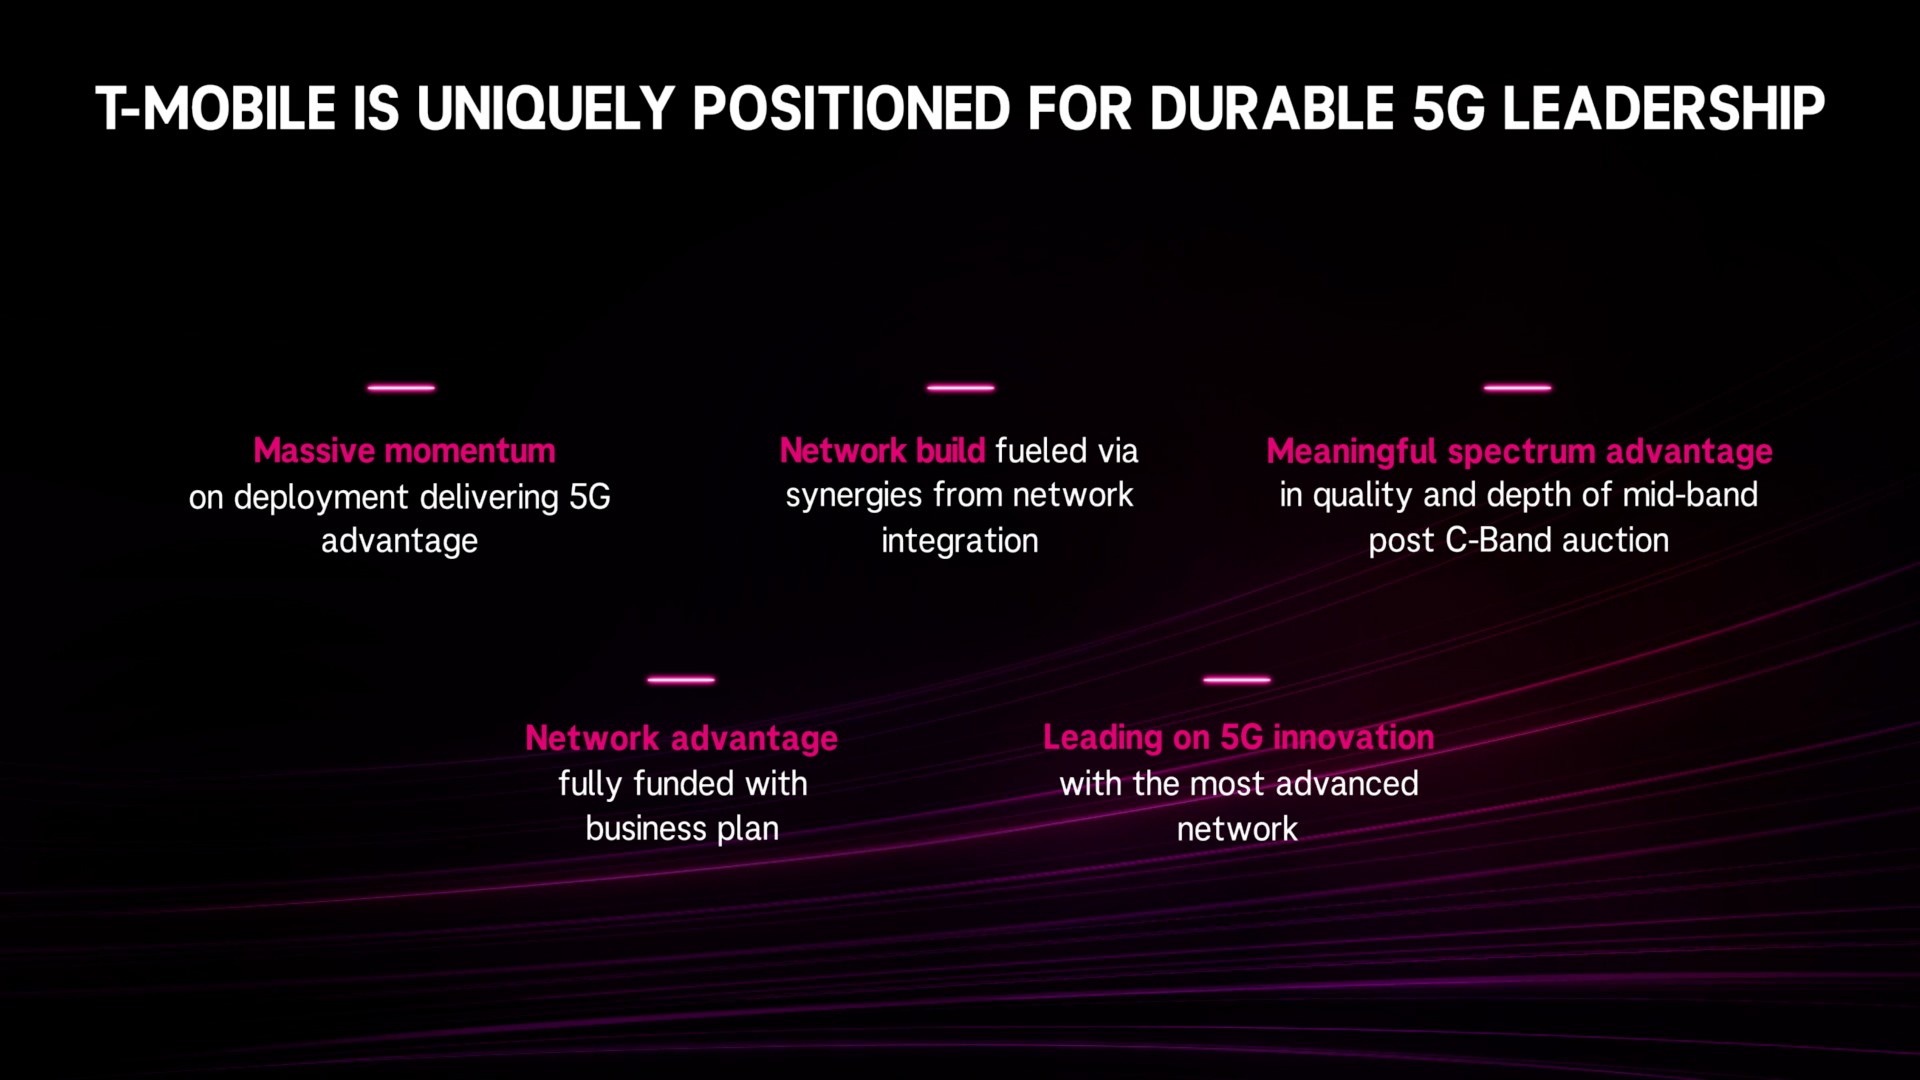 mobile is uniquely positioned for durable leadership | Deutsche Telekom